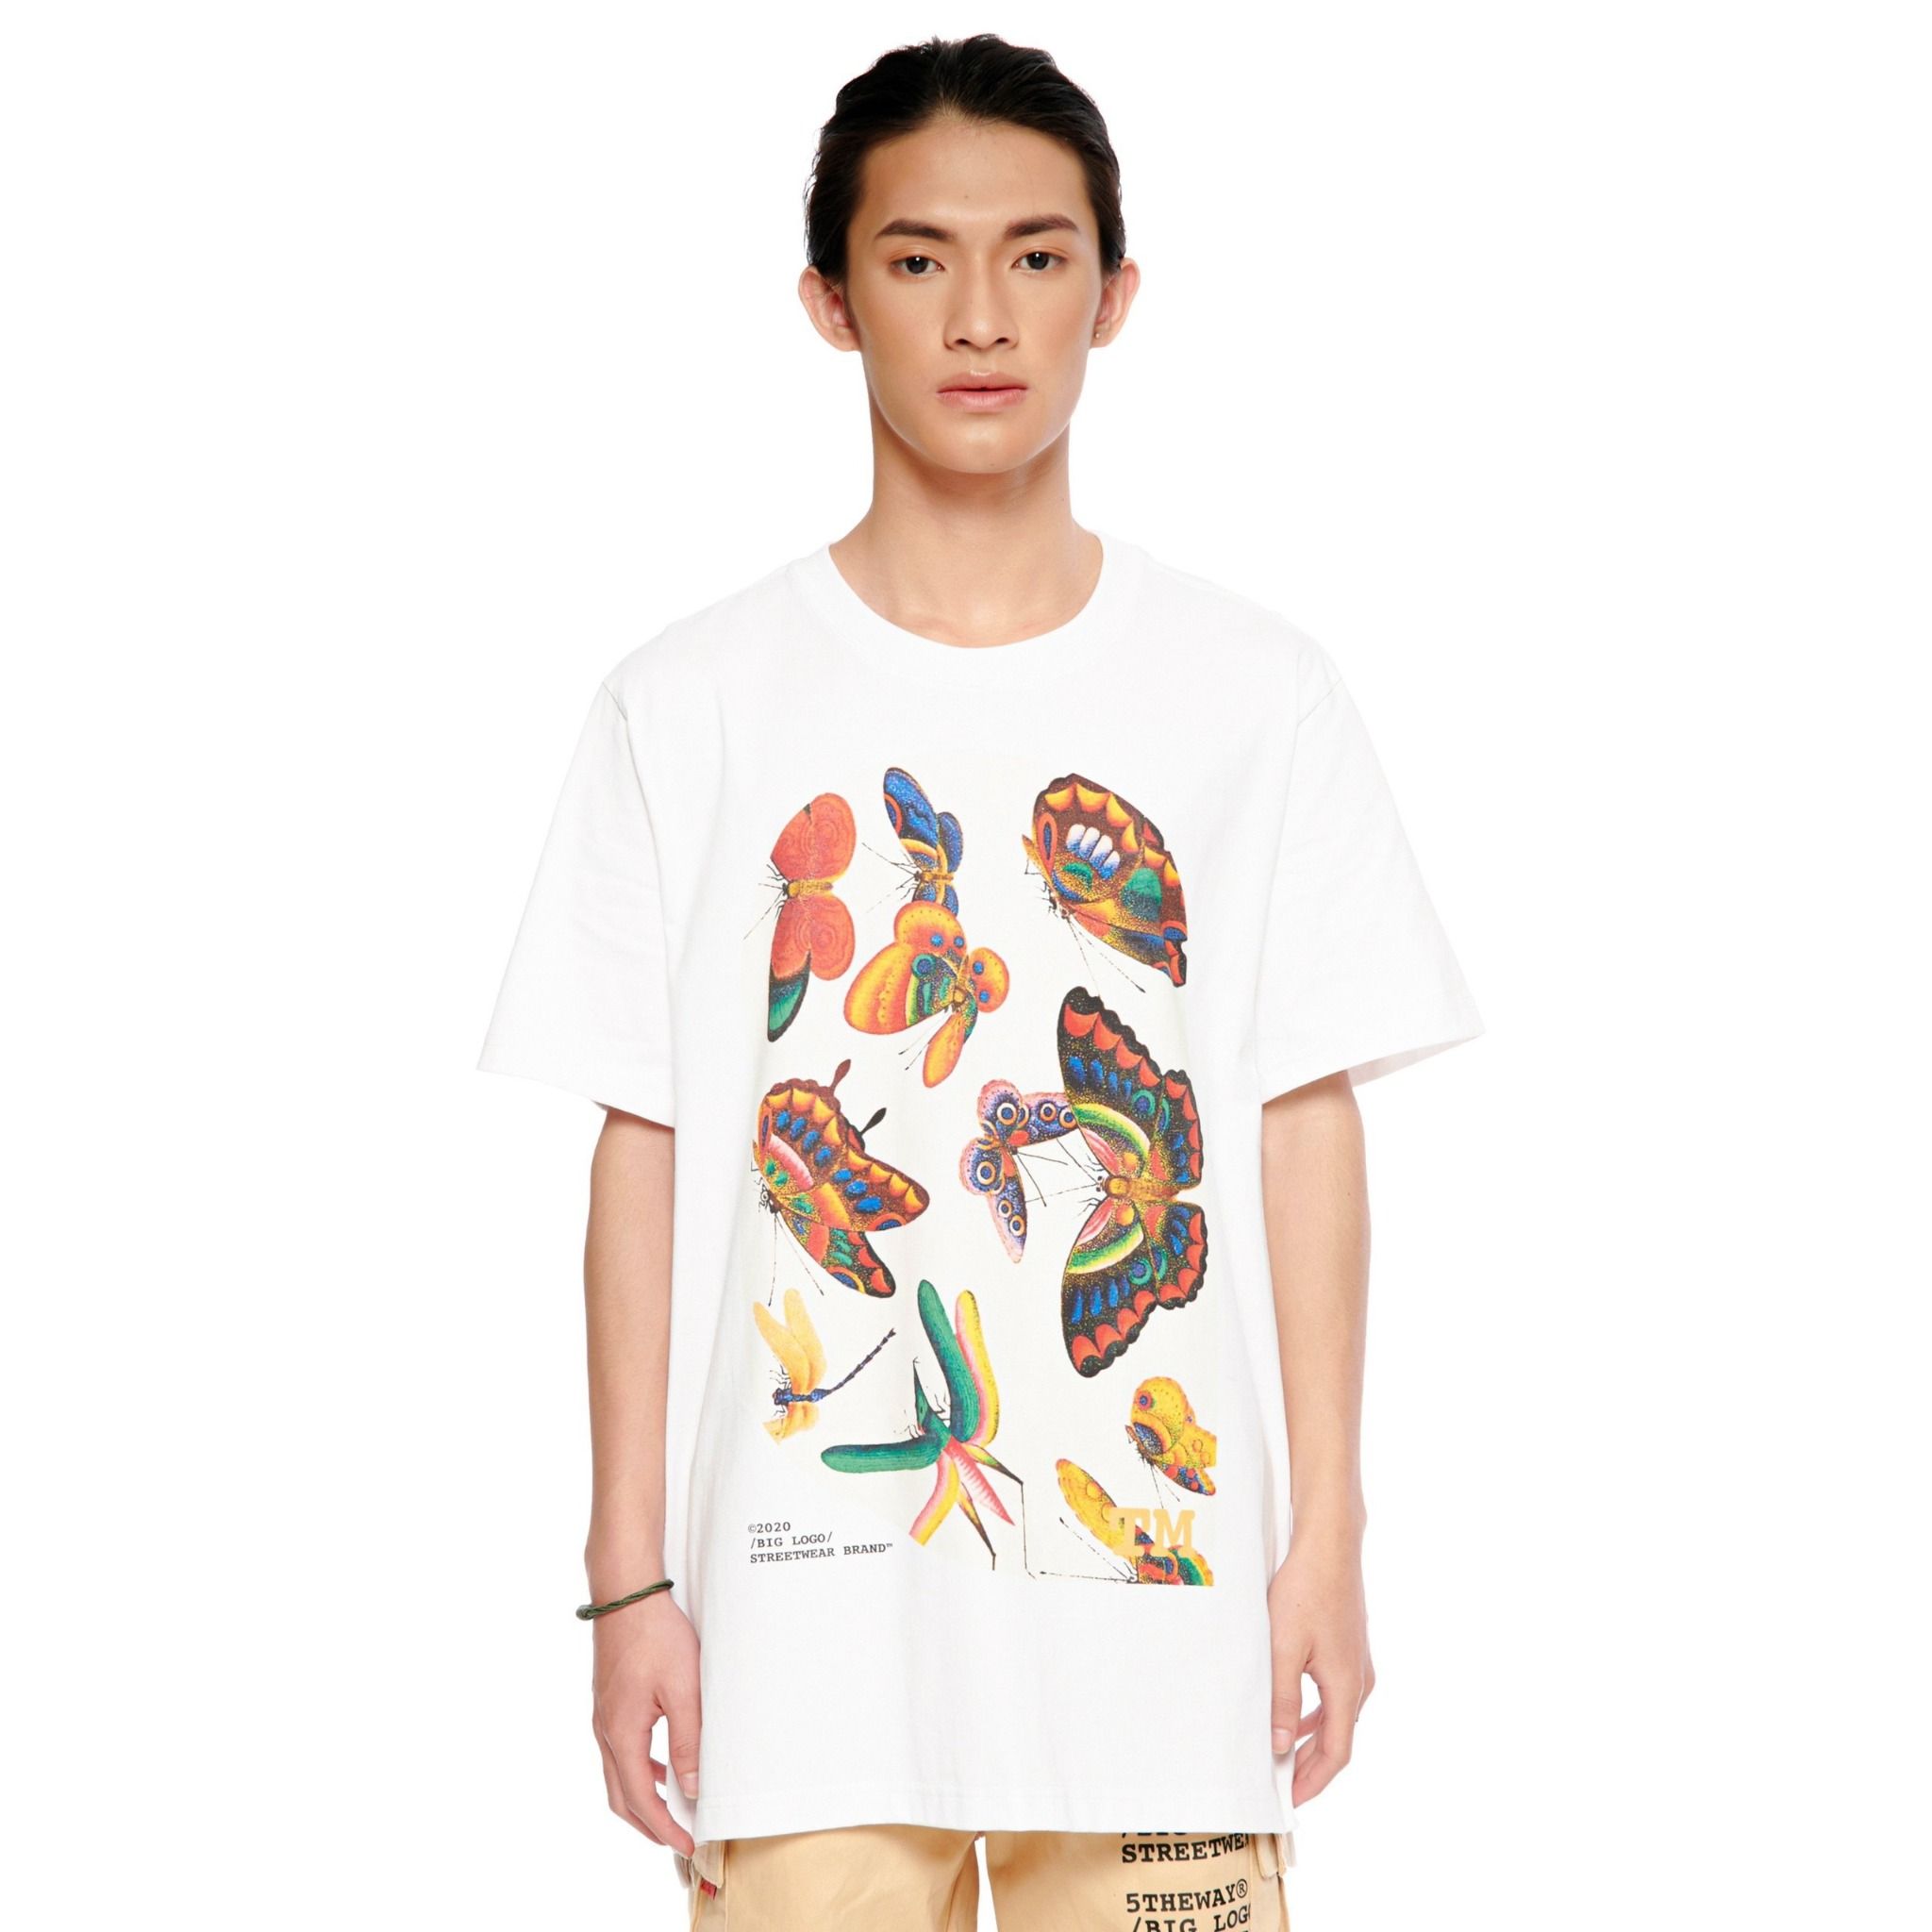  Áo Thun Unisex 5THEWAY® /butterfly/ SQUARE TEE™ 